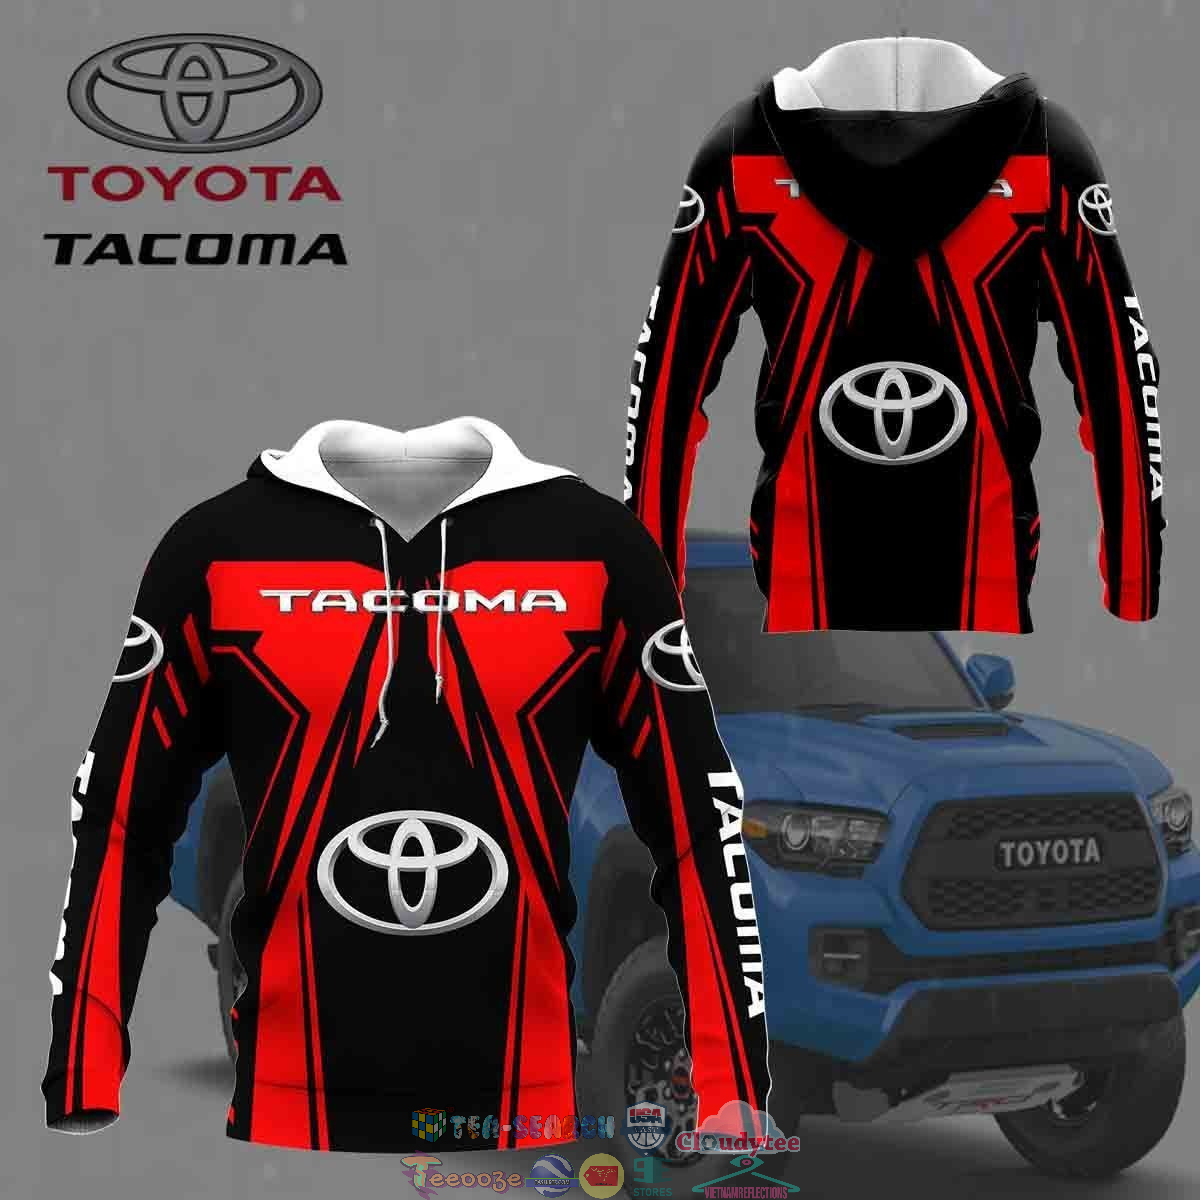 Toyota Tacoma ver 16 3D hoodie and t-shirt – Saleoff